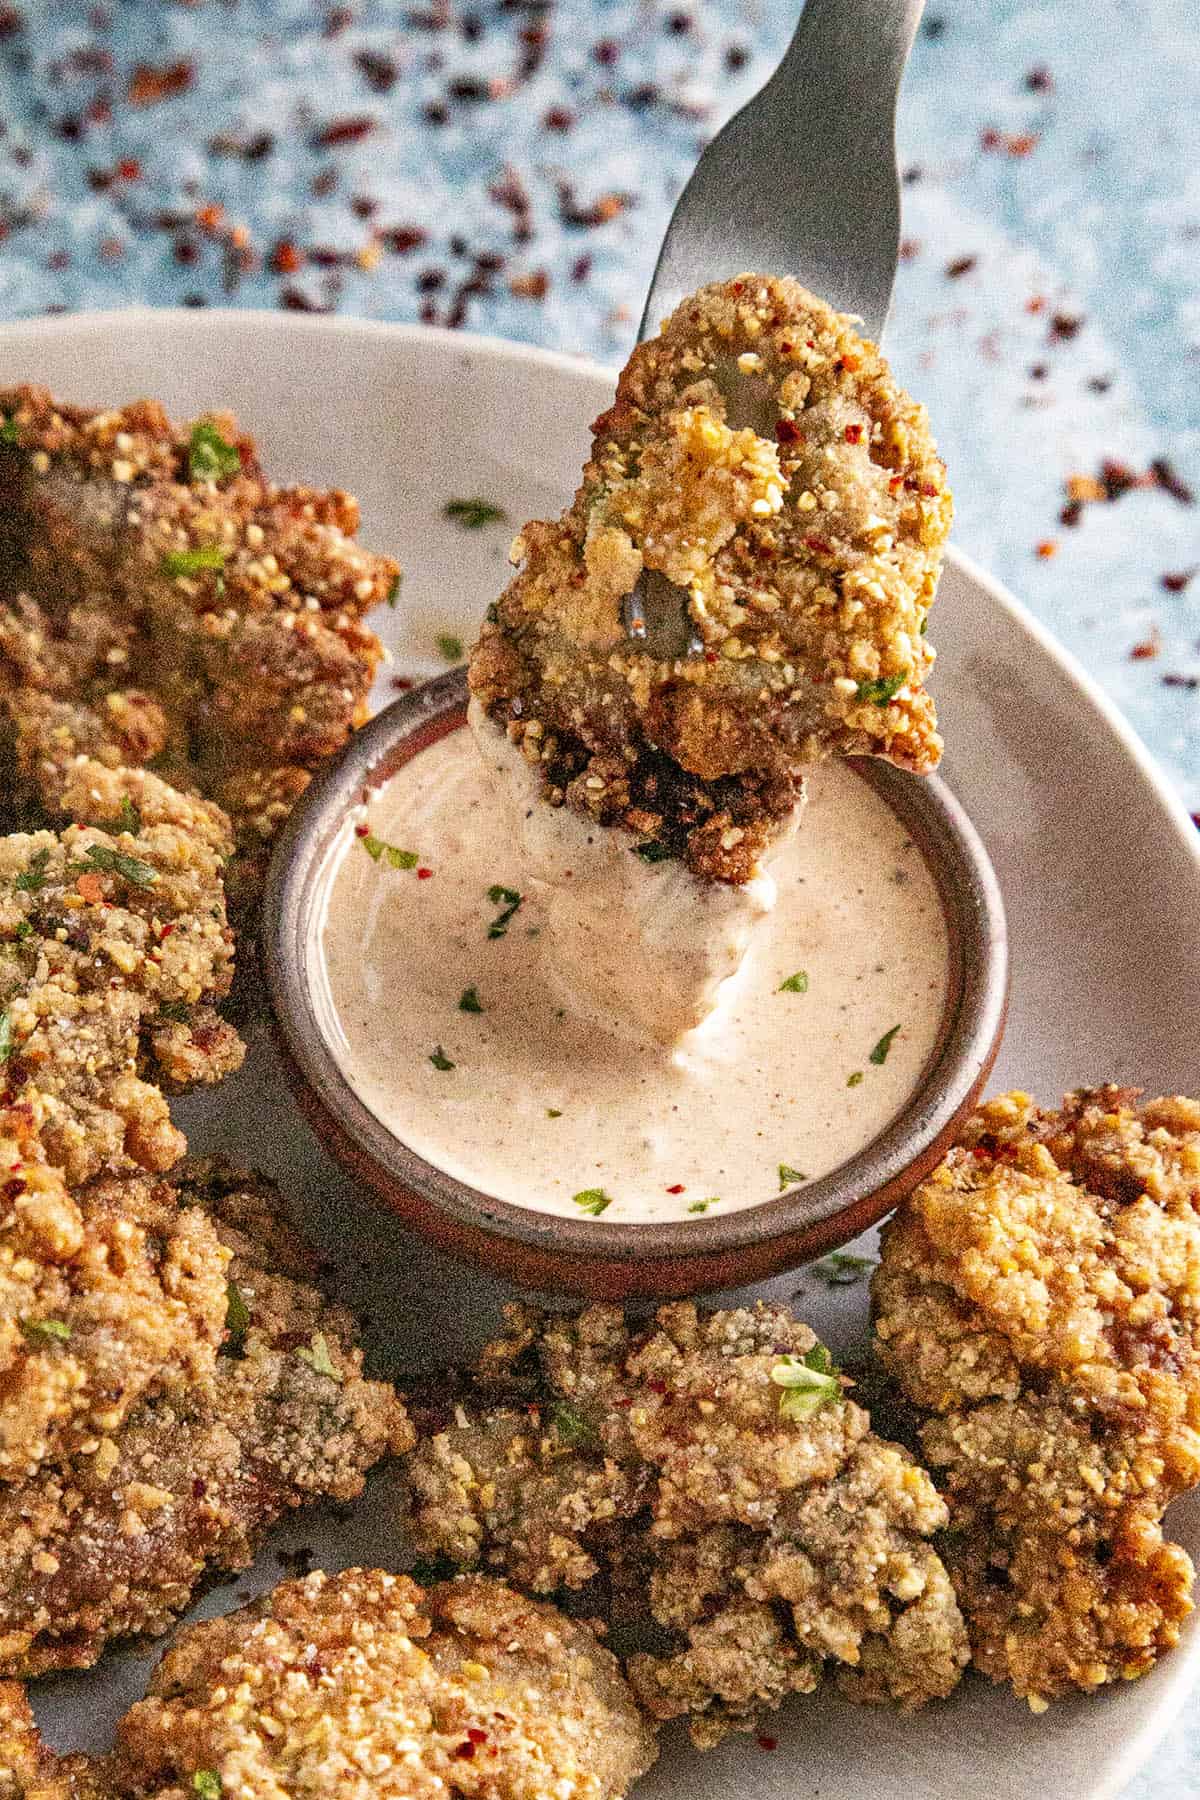 Dipping a fried oyster into homemade remoulade sauce